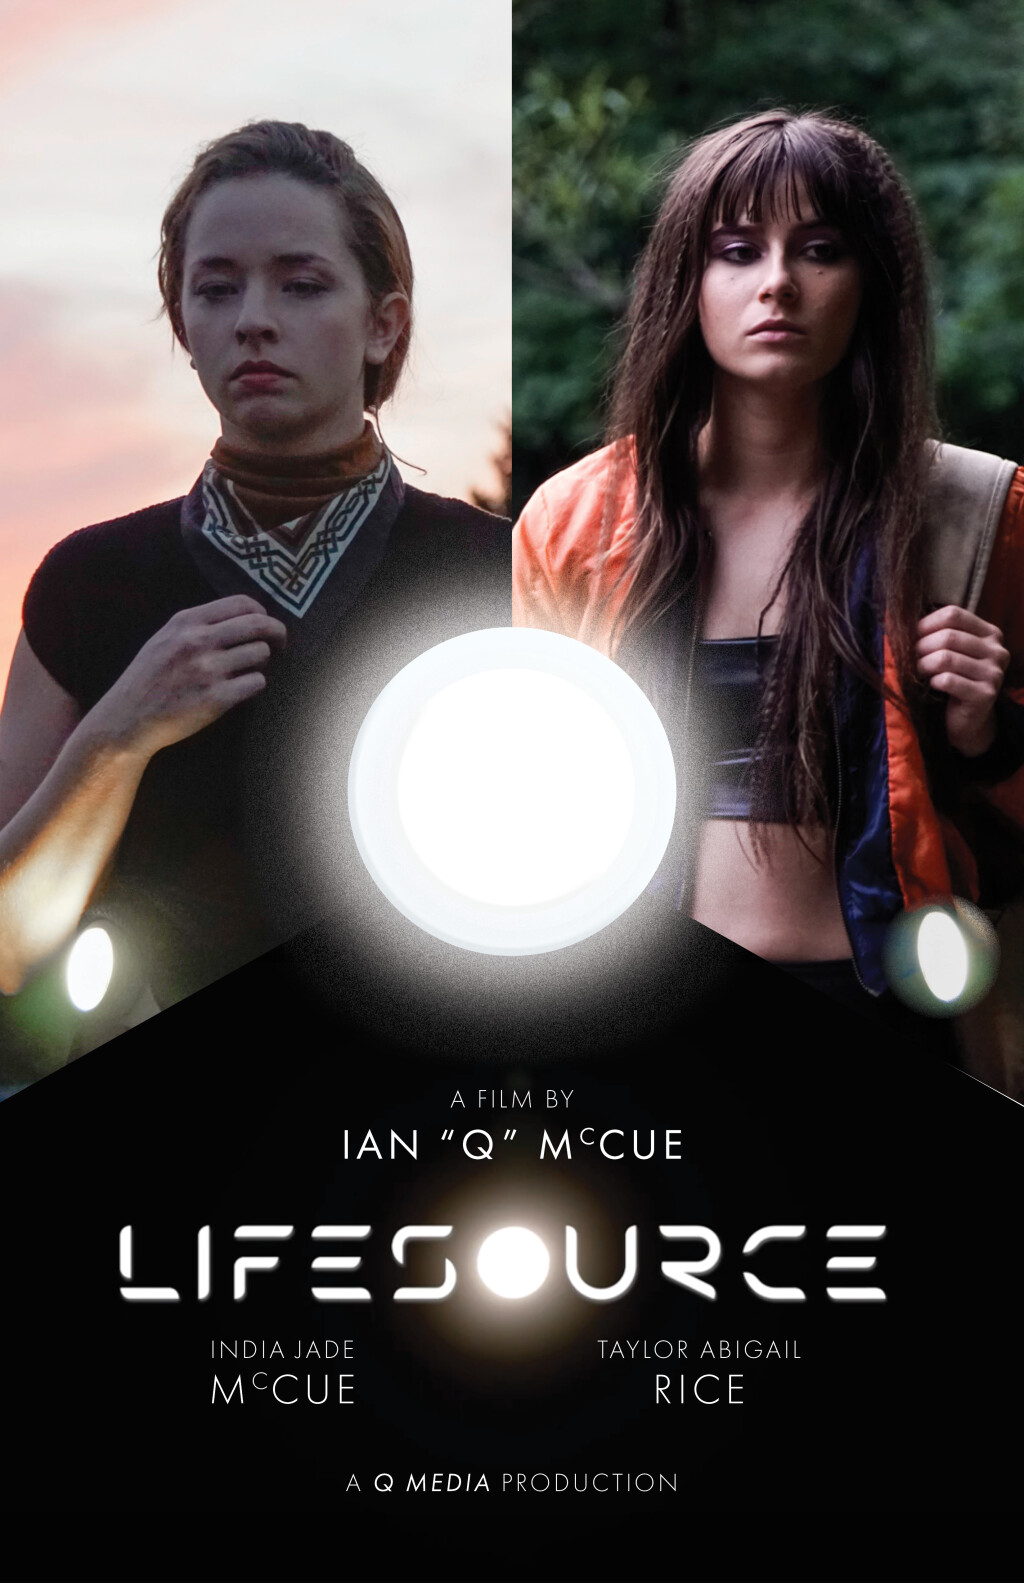 Filmposter for Lifesource